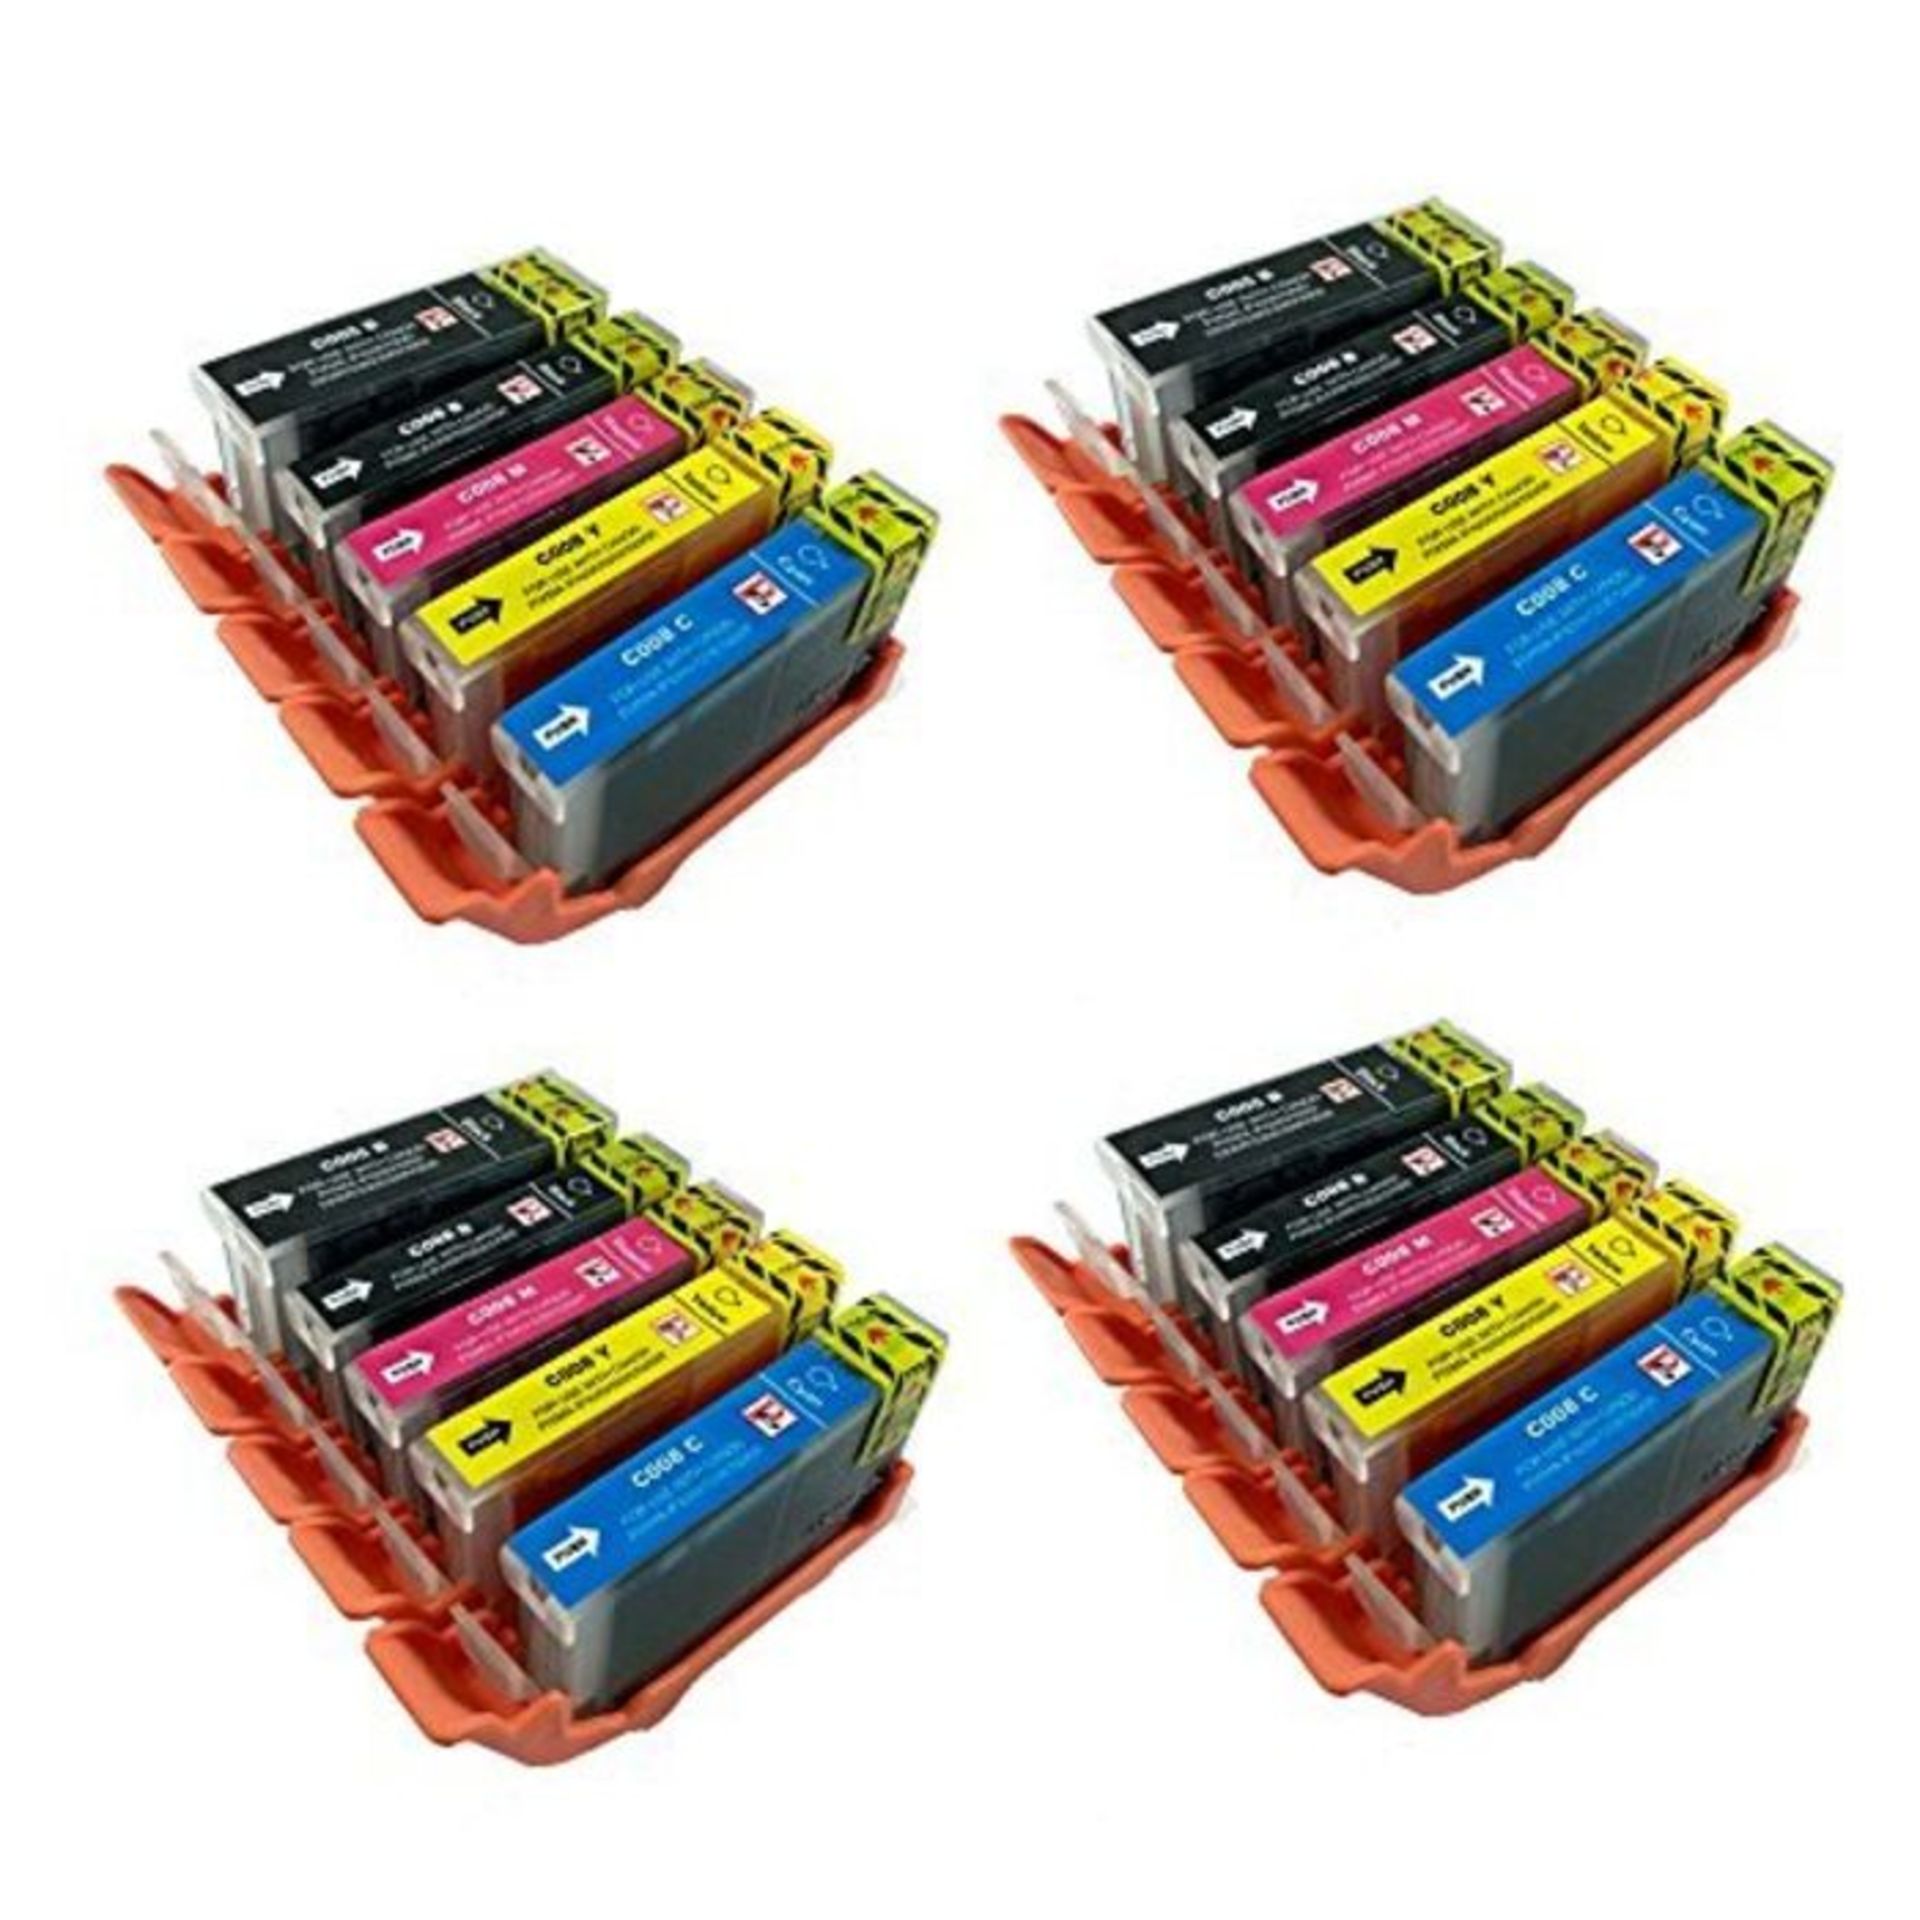 PerfectPrint Compatible Ink Cartridge Replacement for Canon Pixma iP4200 iP4300 iP4500